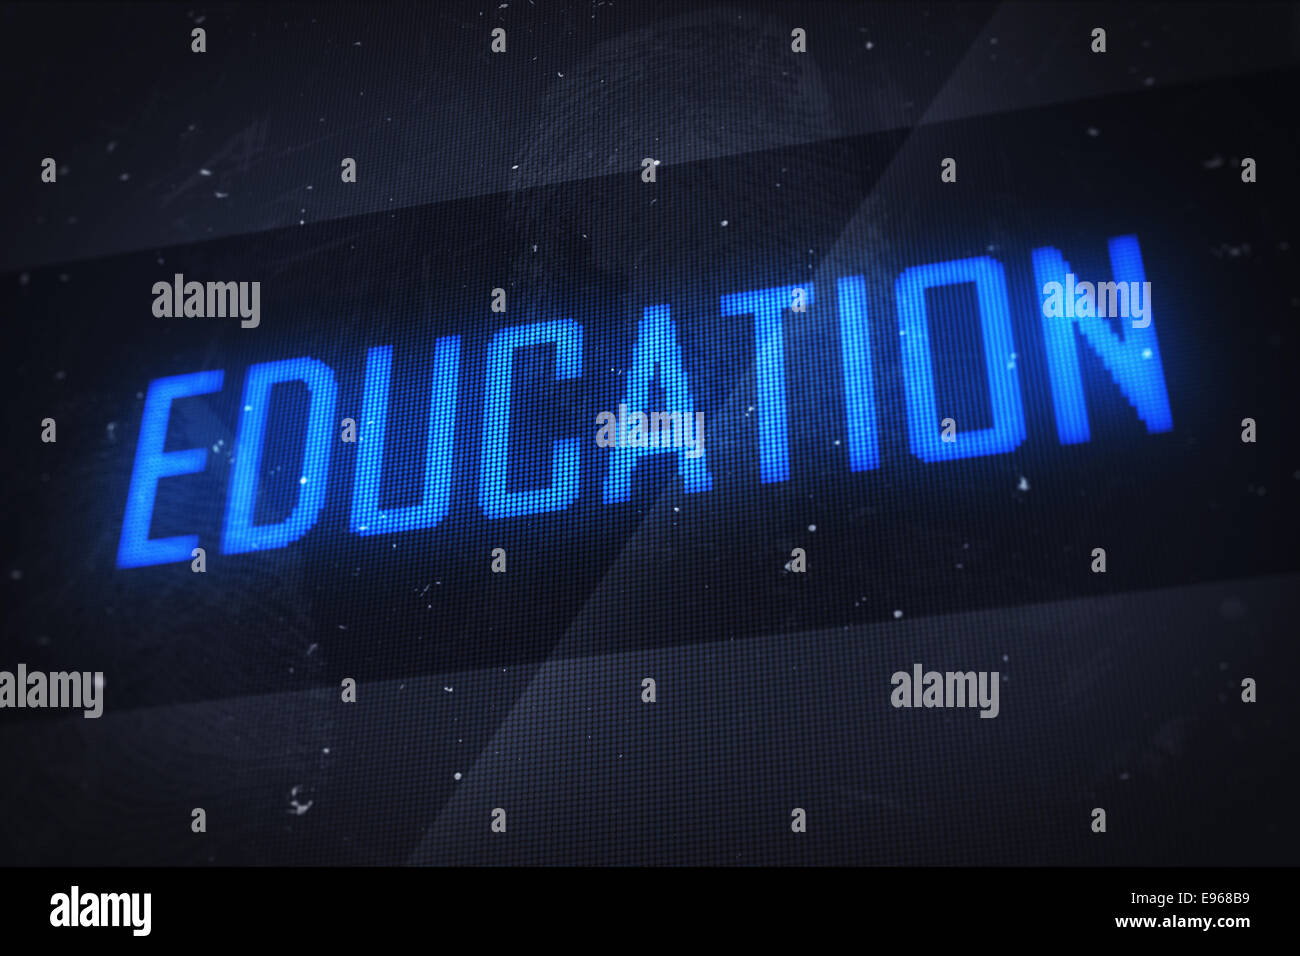 Education concept. Business, technology, internet and networking concept - EDUCATION text on virtual screens Stock Photo